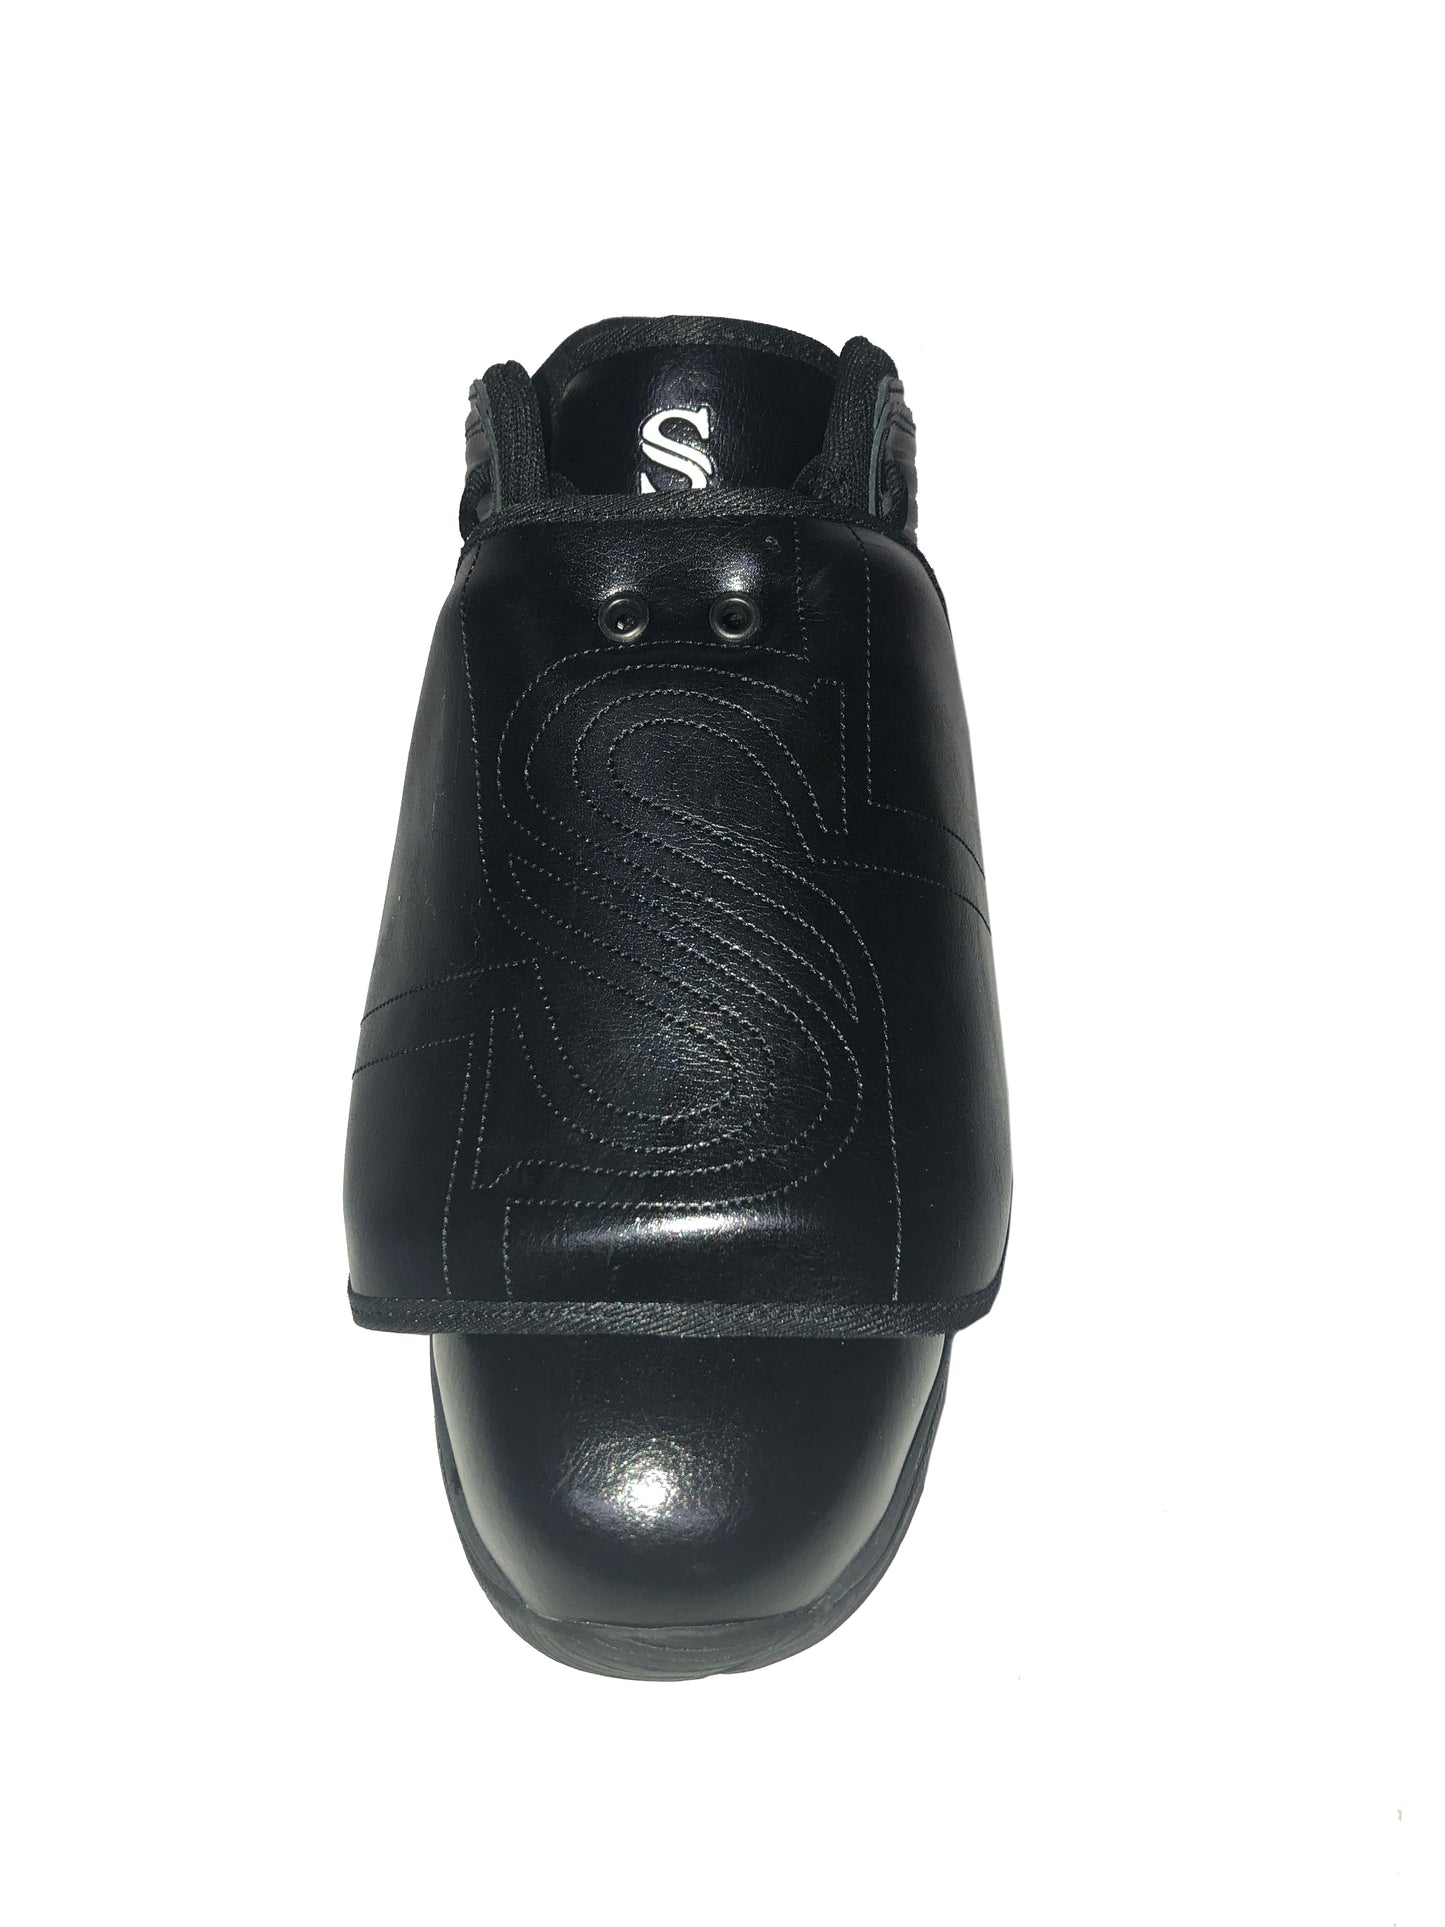 BBS-PS1 - Smitty All Black Mid-Cut Umpire Plate Shoe